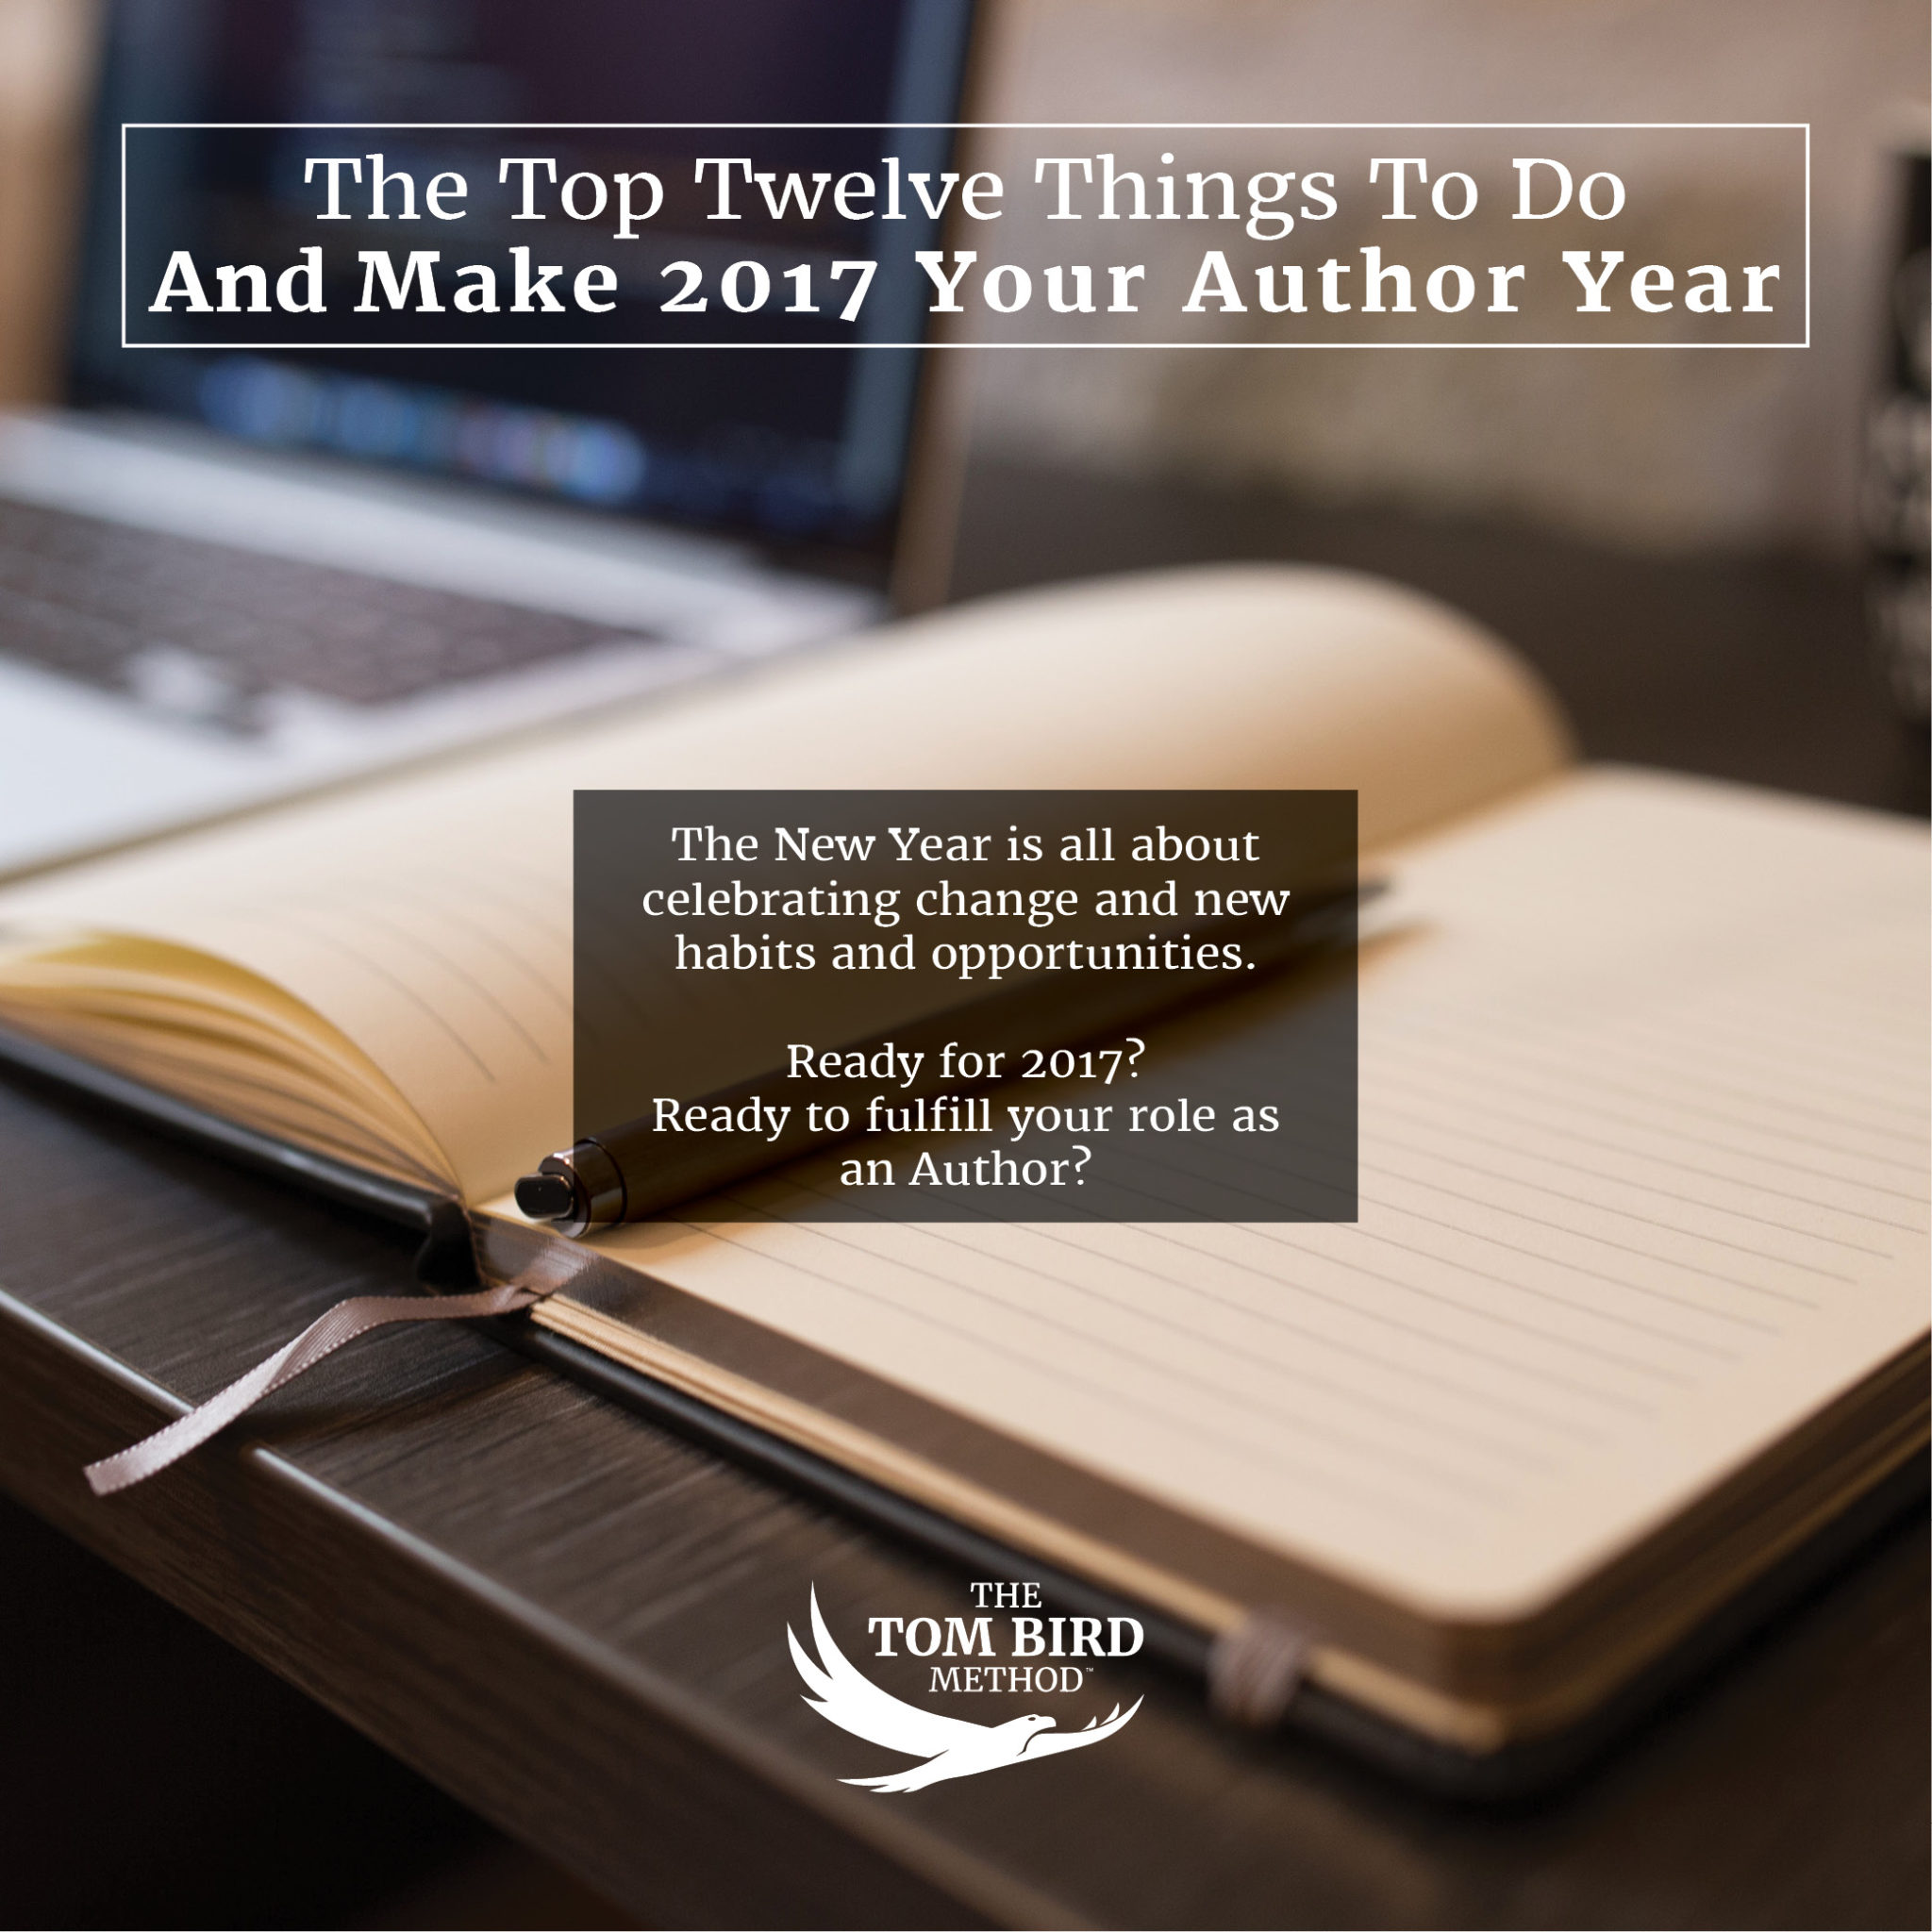 top 12 things to make 2017 your author year - Tom Bird